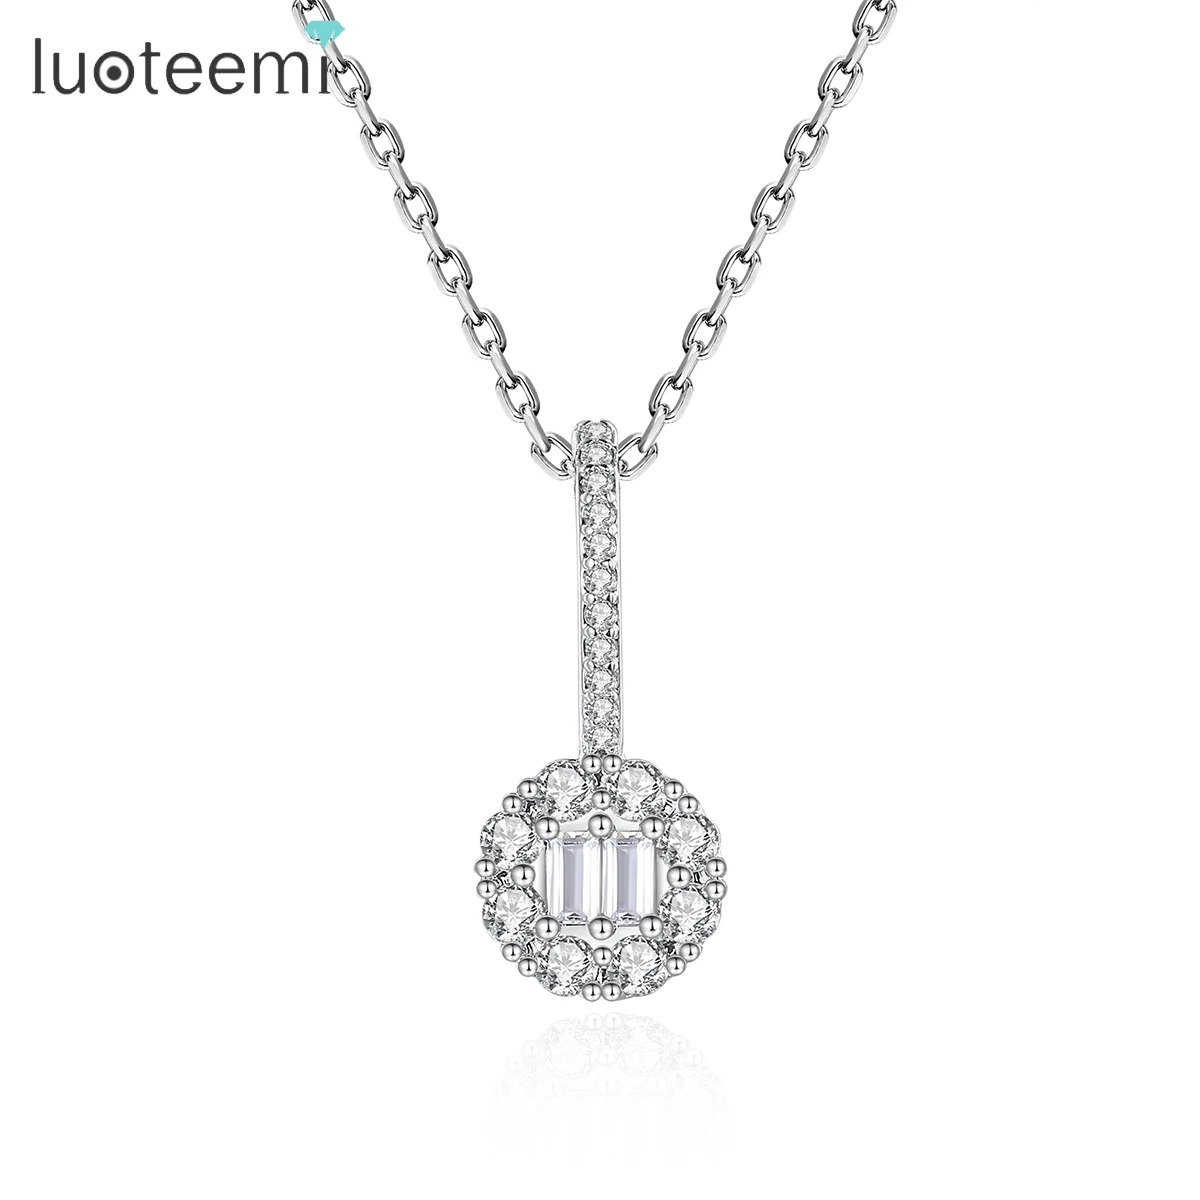 

LUOTEEMI Zircon New Necklace Iced Out Custom Chain Crystal Woman Fashion Trendy Cz Cubic Diamond Pendant